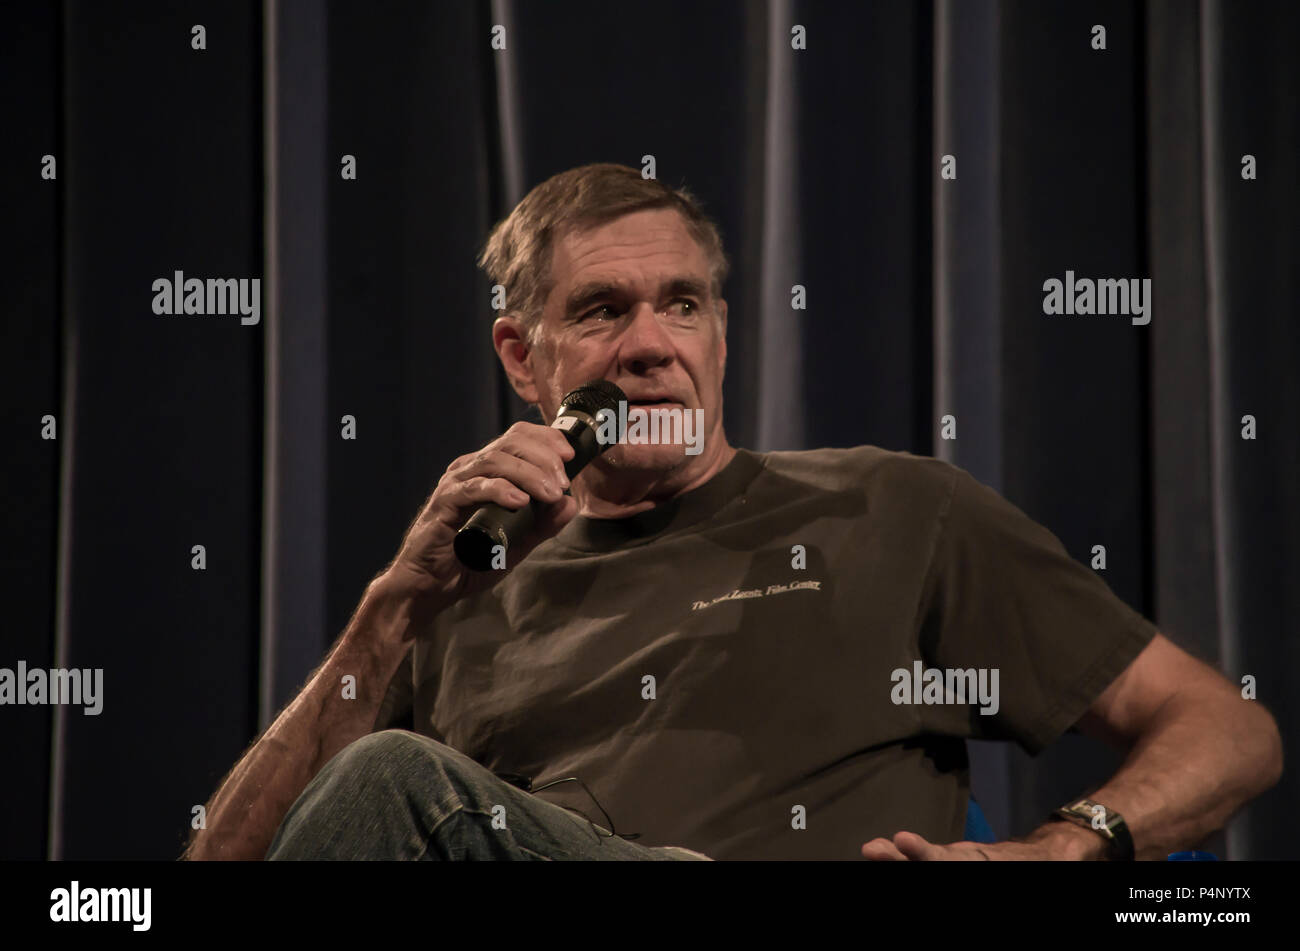 Madrid, Spain. 22nd June 2018. Film director Gus Van Sant, who is visiting Madrid for the premiere of his latest movie “Don’t Worry, He Won’t Get Far on Foot”, gave a conference at the Spanish Film Archive after a projection of “Elephant” as part of a cicle about his filmography. Credit: Lora Grigorova/Alamy Live News Stock Photo